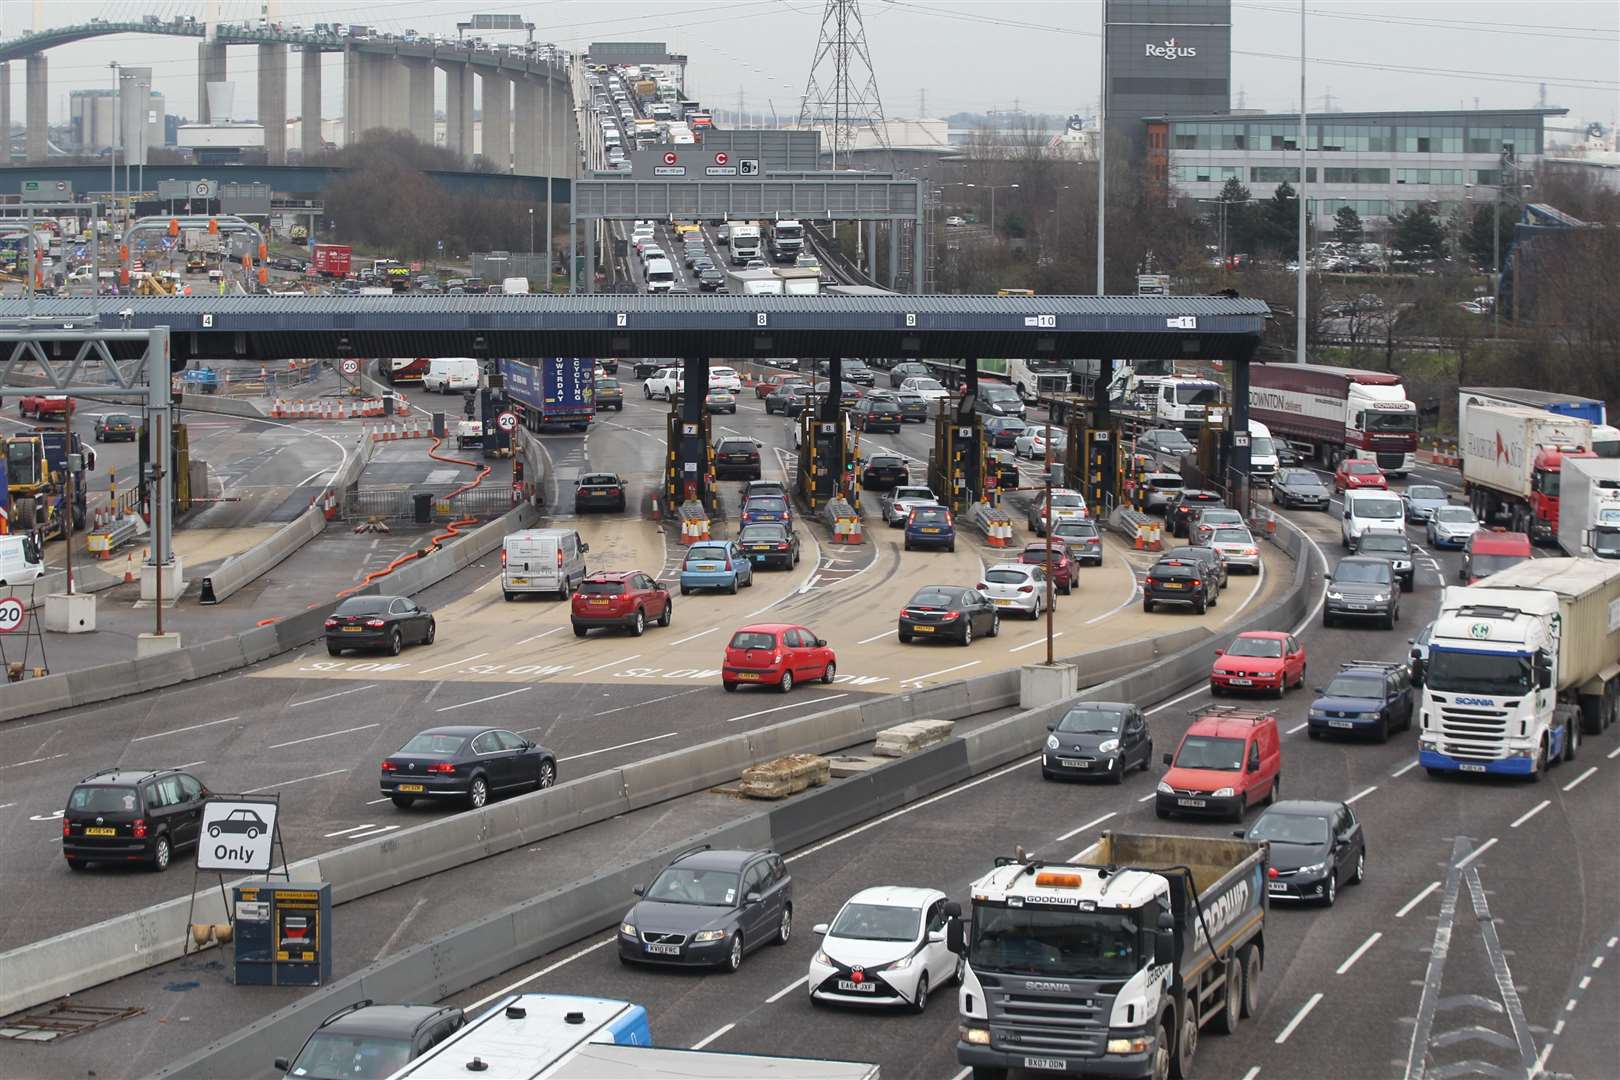 The tolls were scrapped in 2014. Picture: John Westhrop